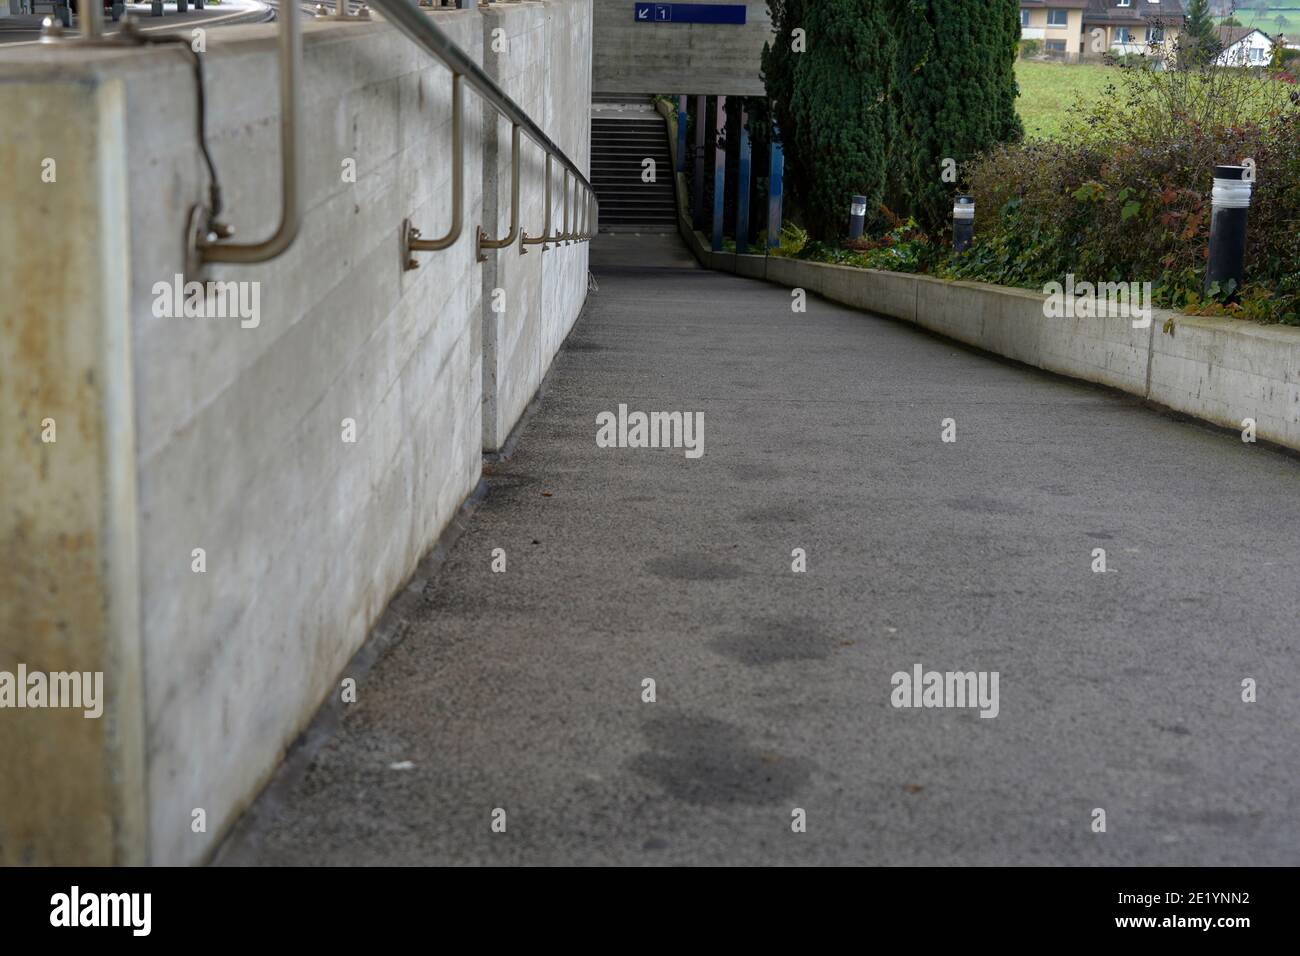 Subway crossing or underpass with inclined plane in train station village Urdorf, Switzerland. Stock Photo